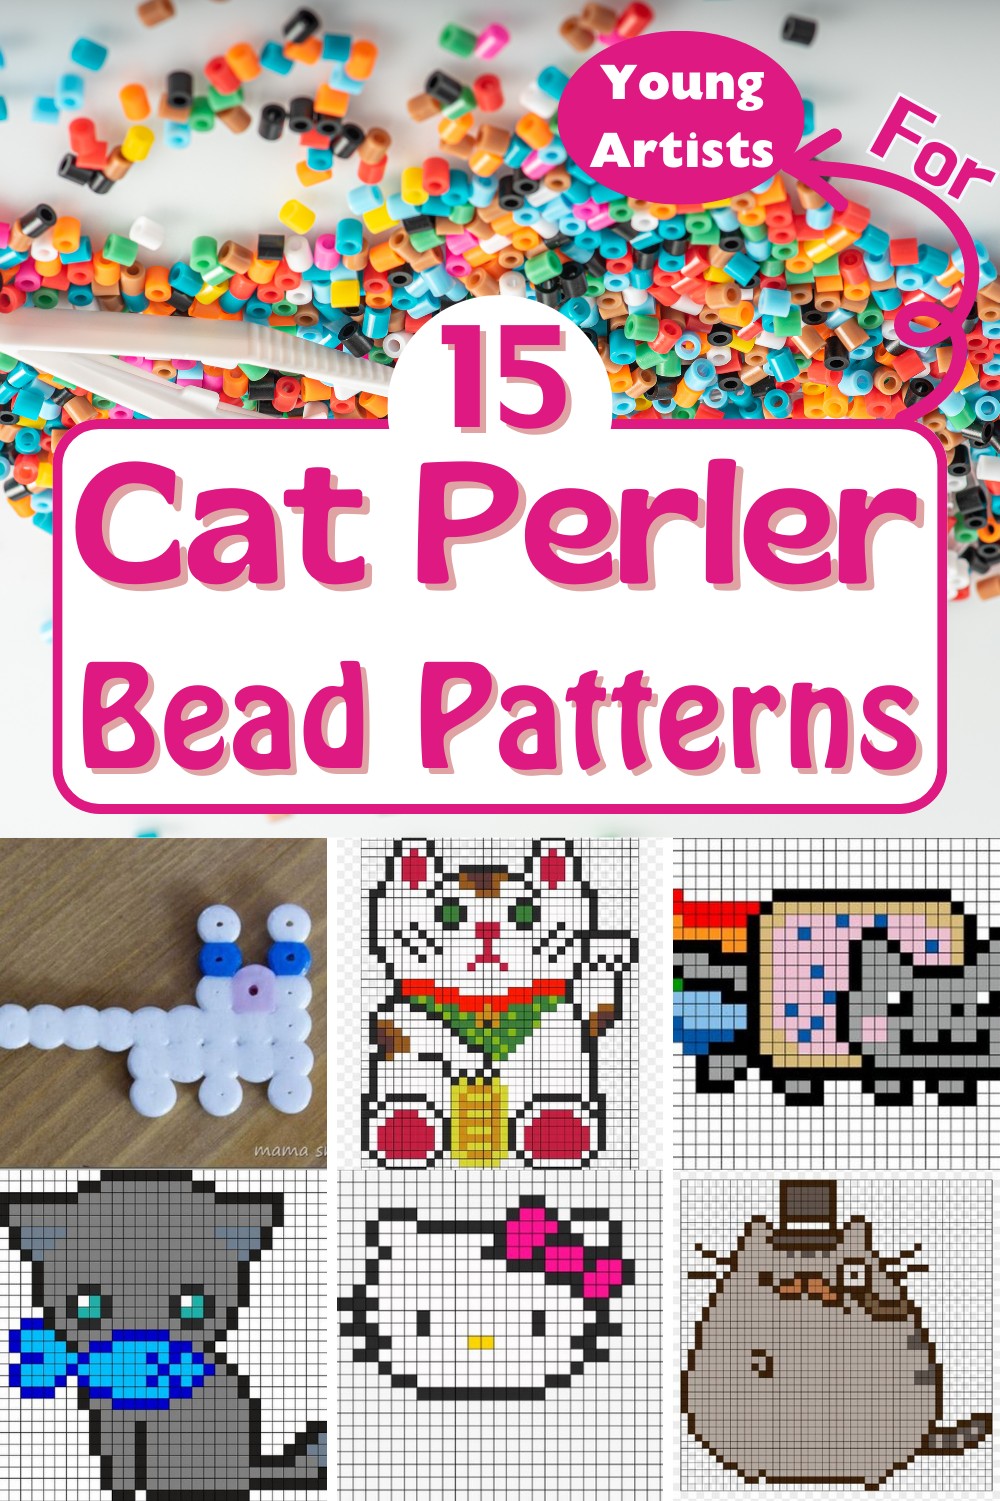 15 Cat Perler Beads For Young Artists - DIY Crafts